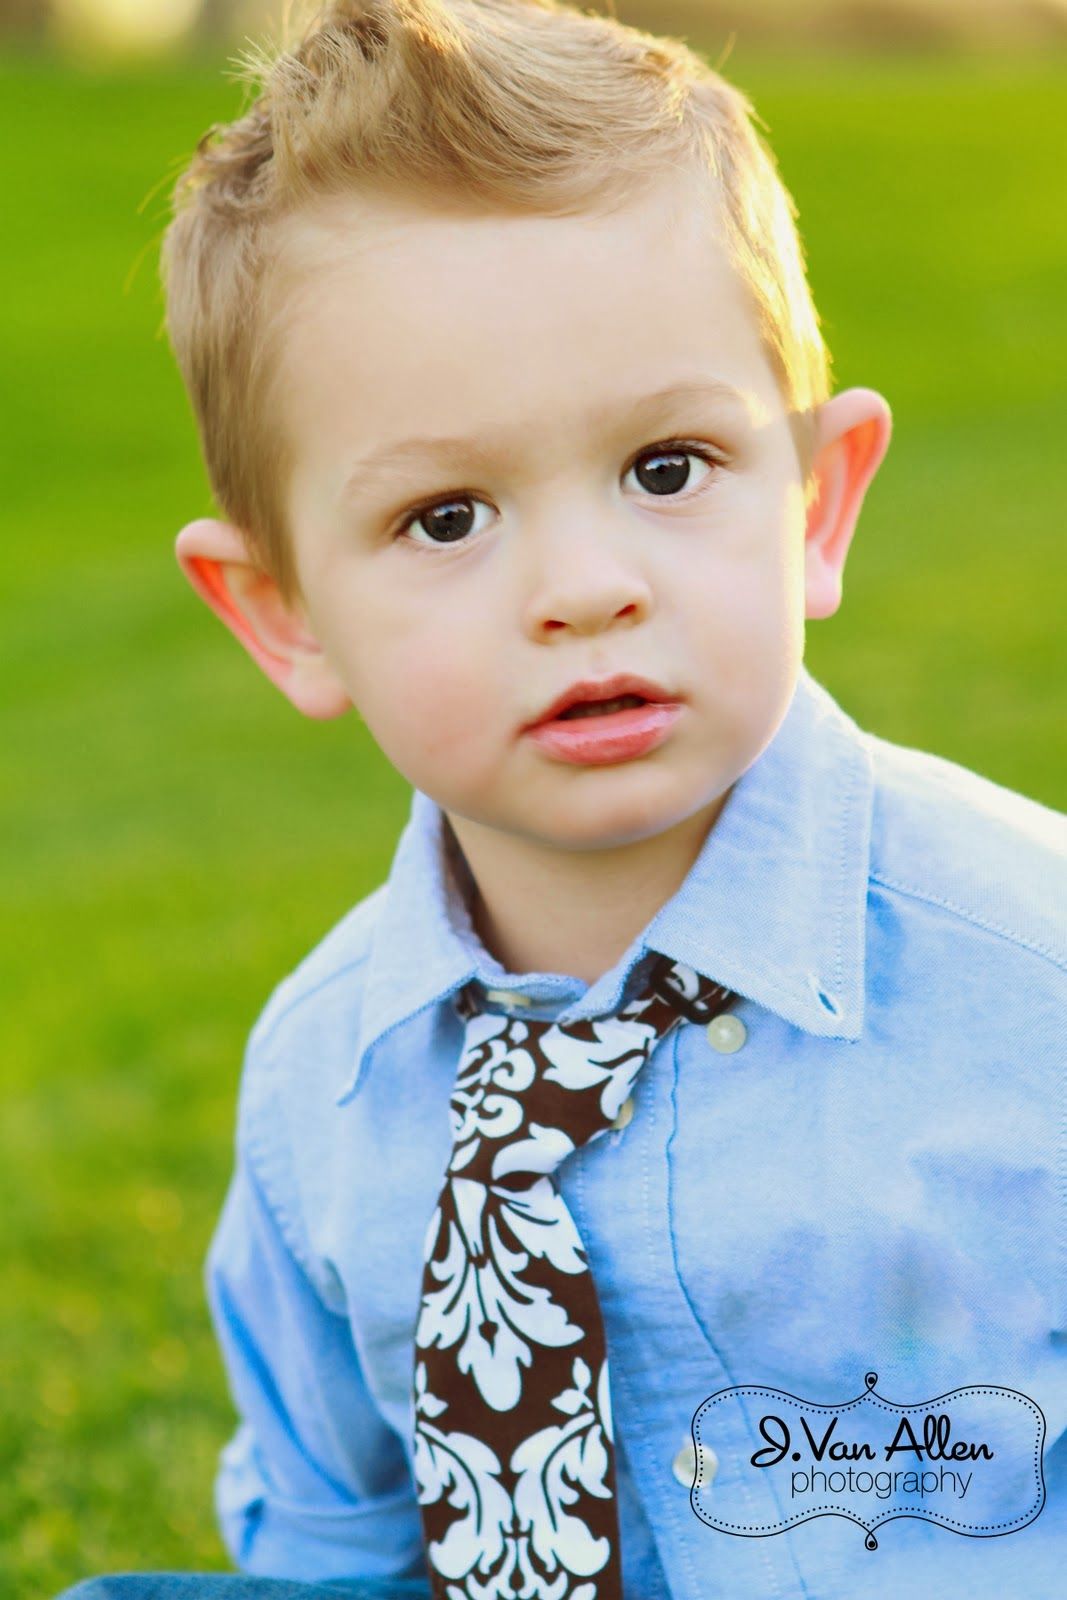 Cute Baby Boy Picture For Facebook Profile Need Fun